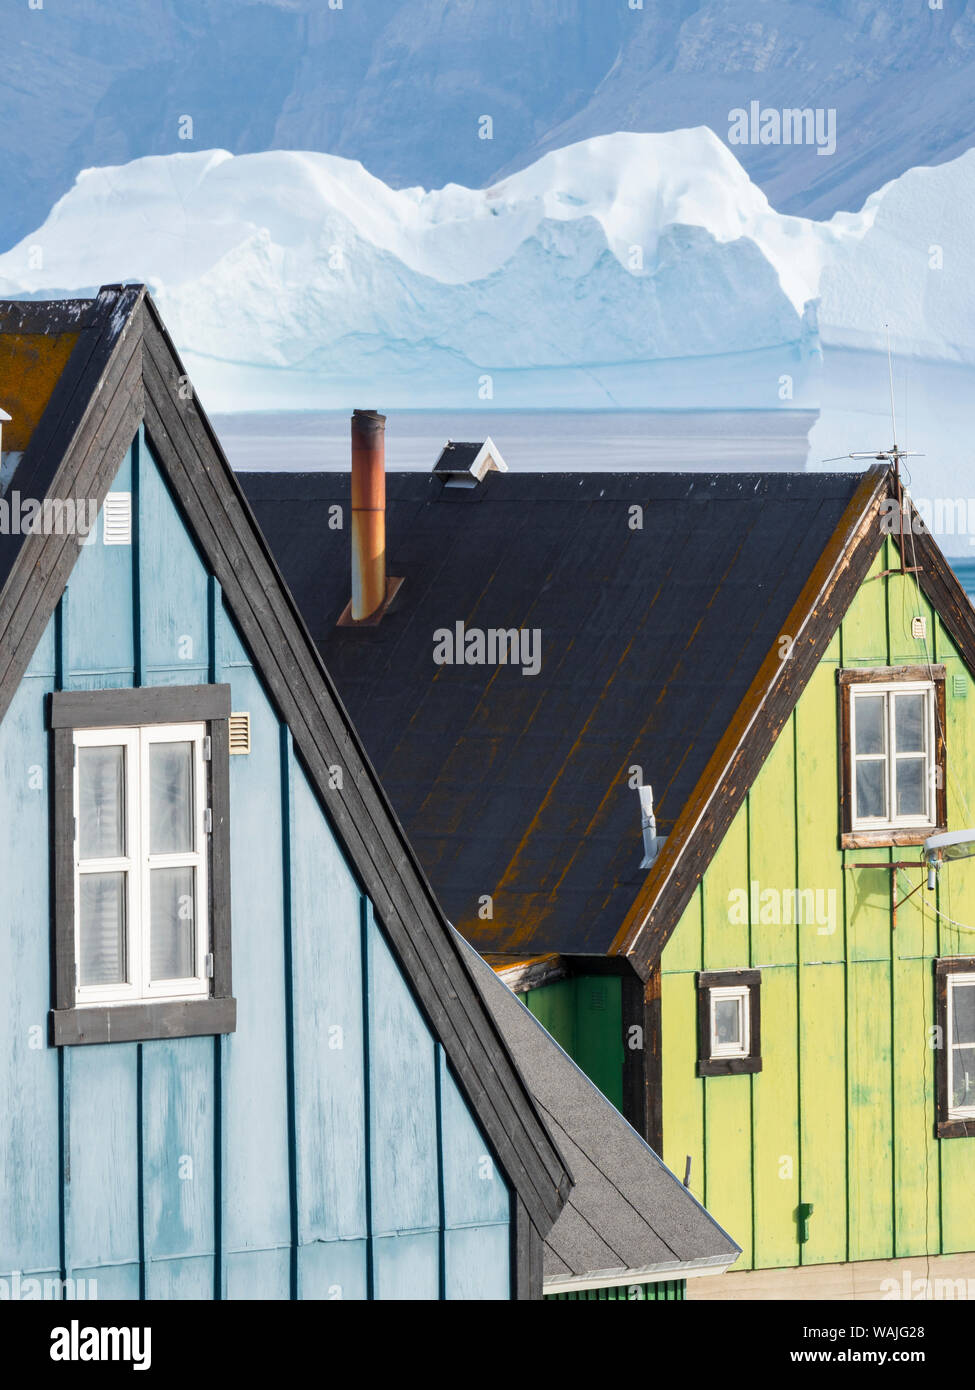 Small town of Uummannaq, northwest Greenland. Background the glaciated Nuussuaq (Nuussuaq) Peninsula. (Editorial Use Only) Stock Photo